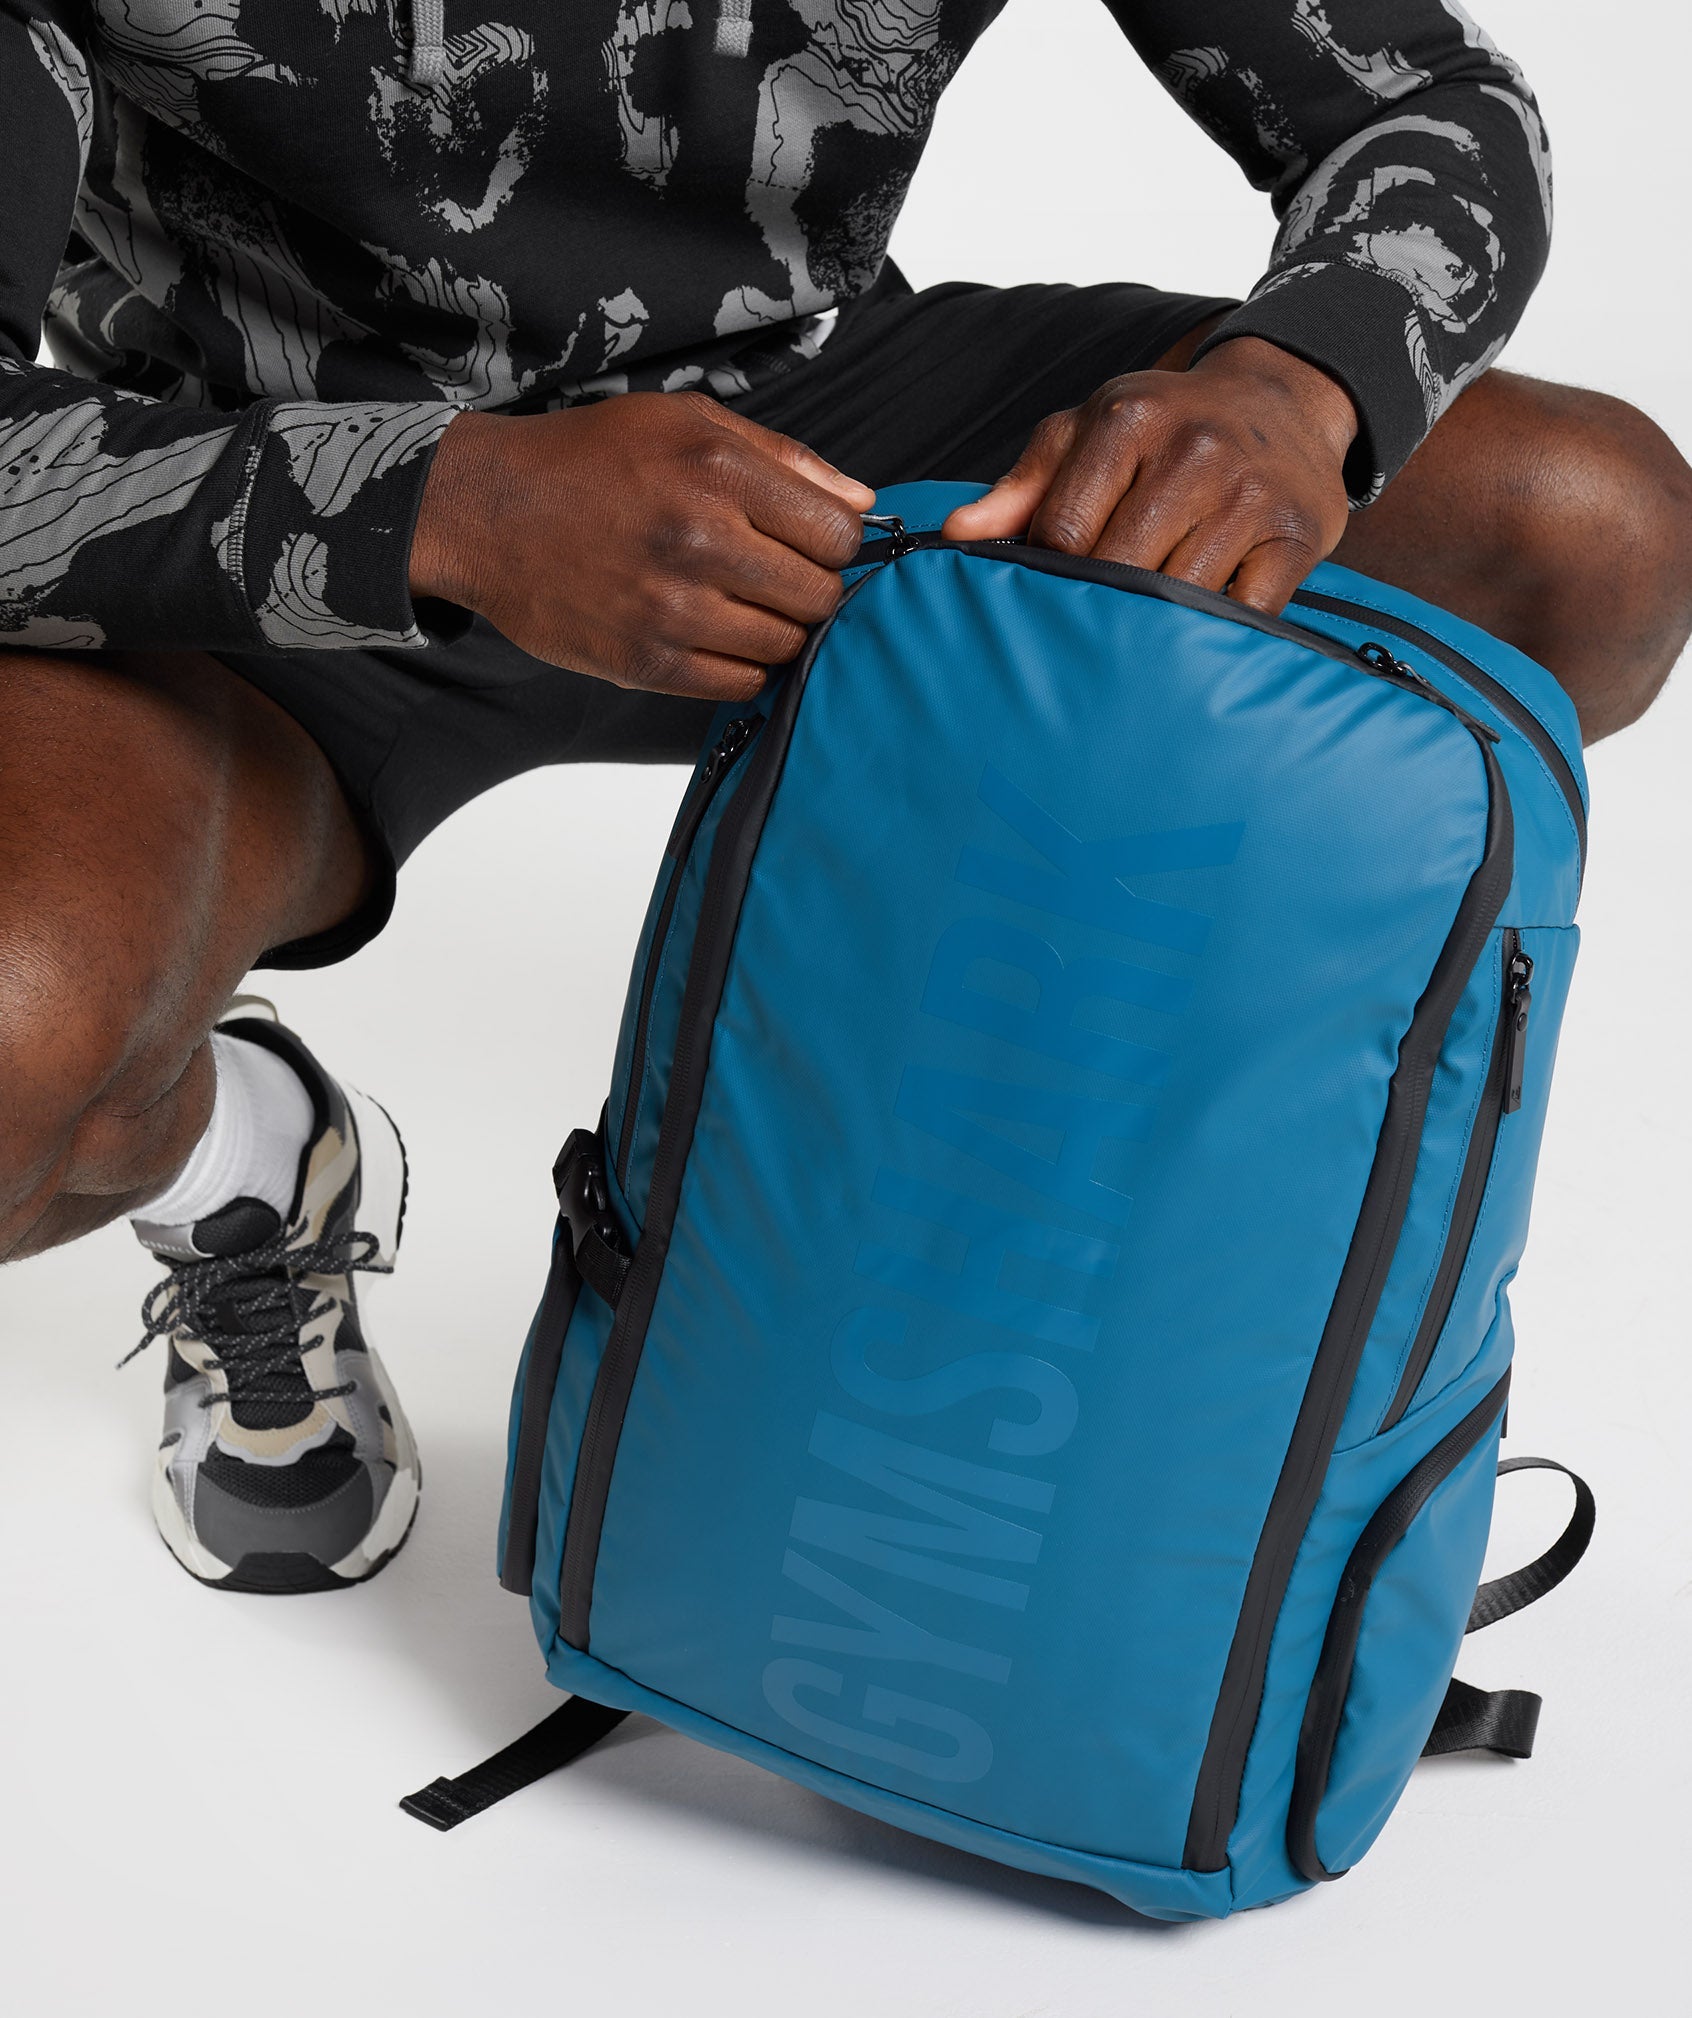 X-Series Bag 0.3 in Lakeside Blue - view 1